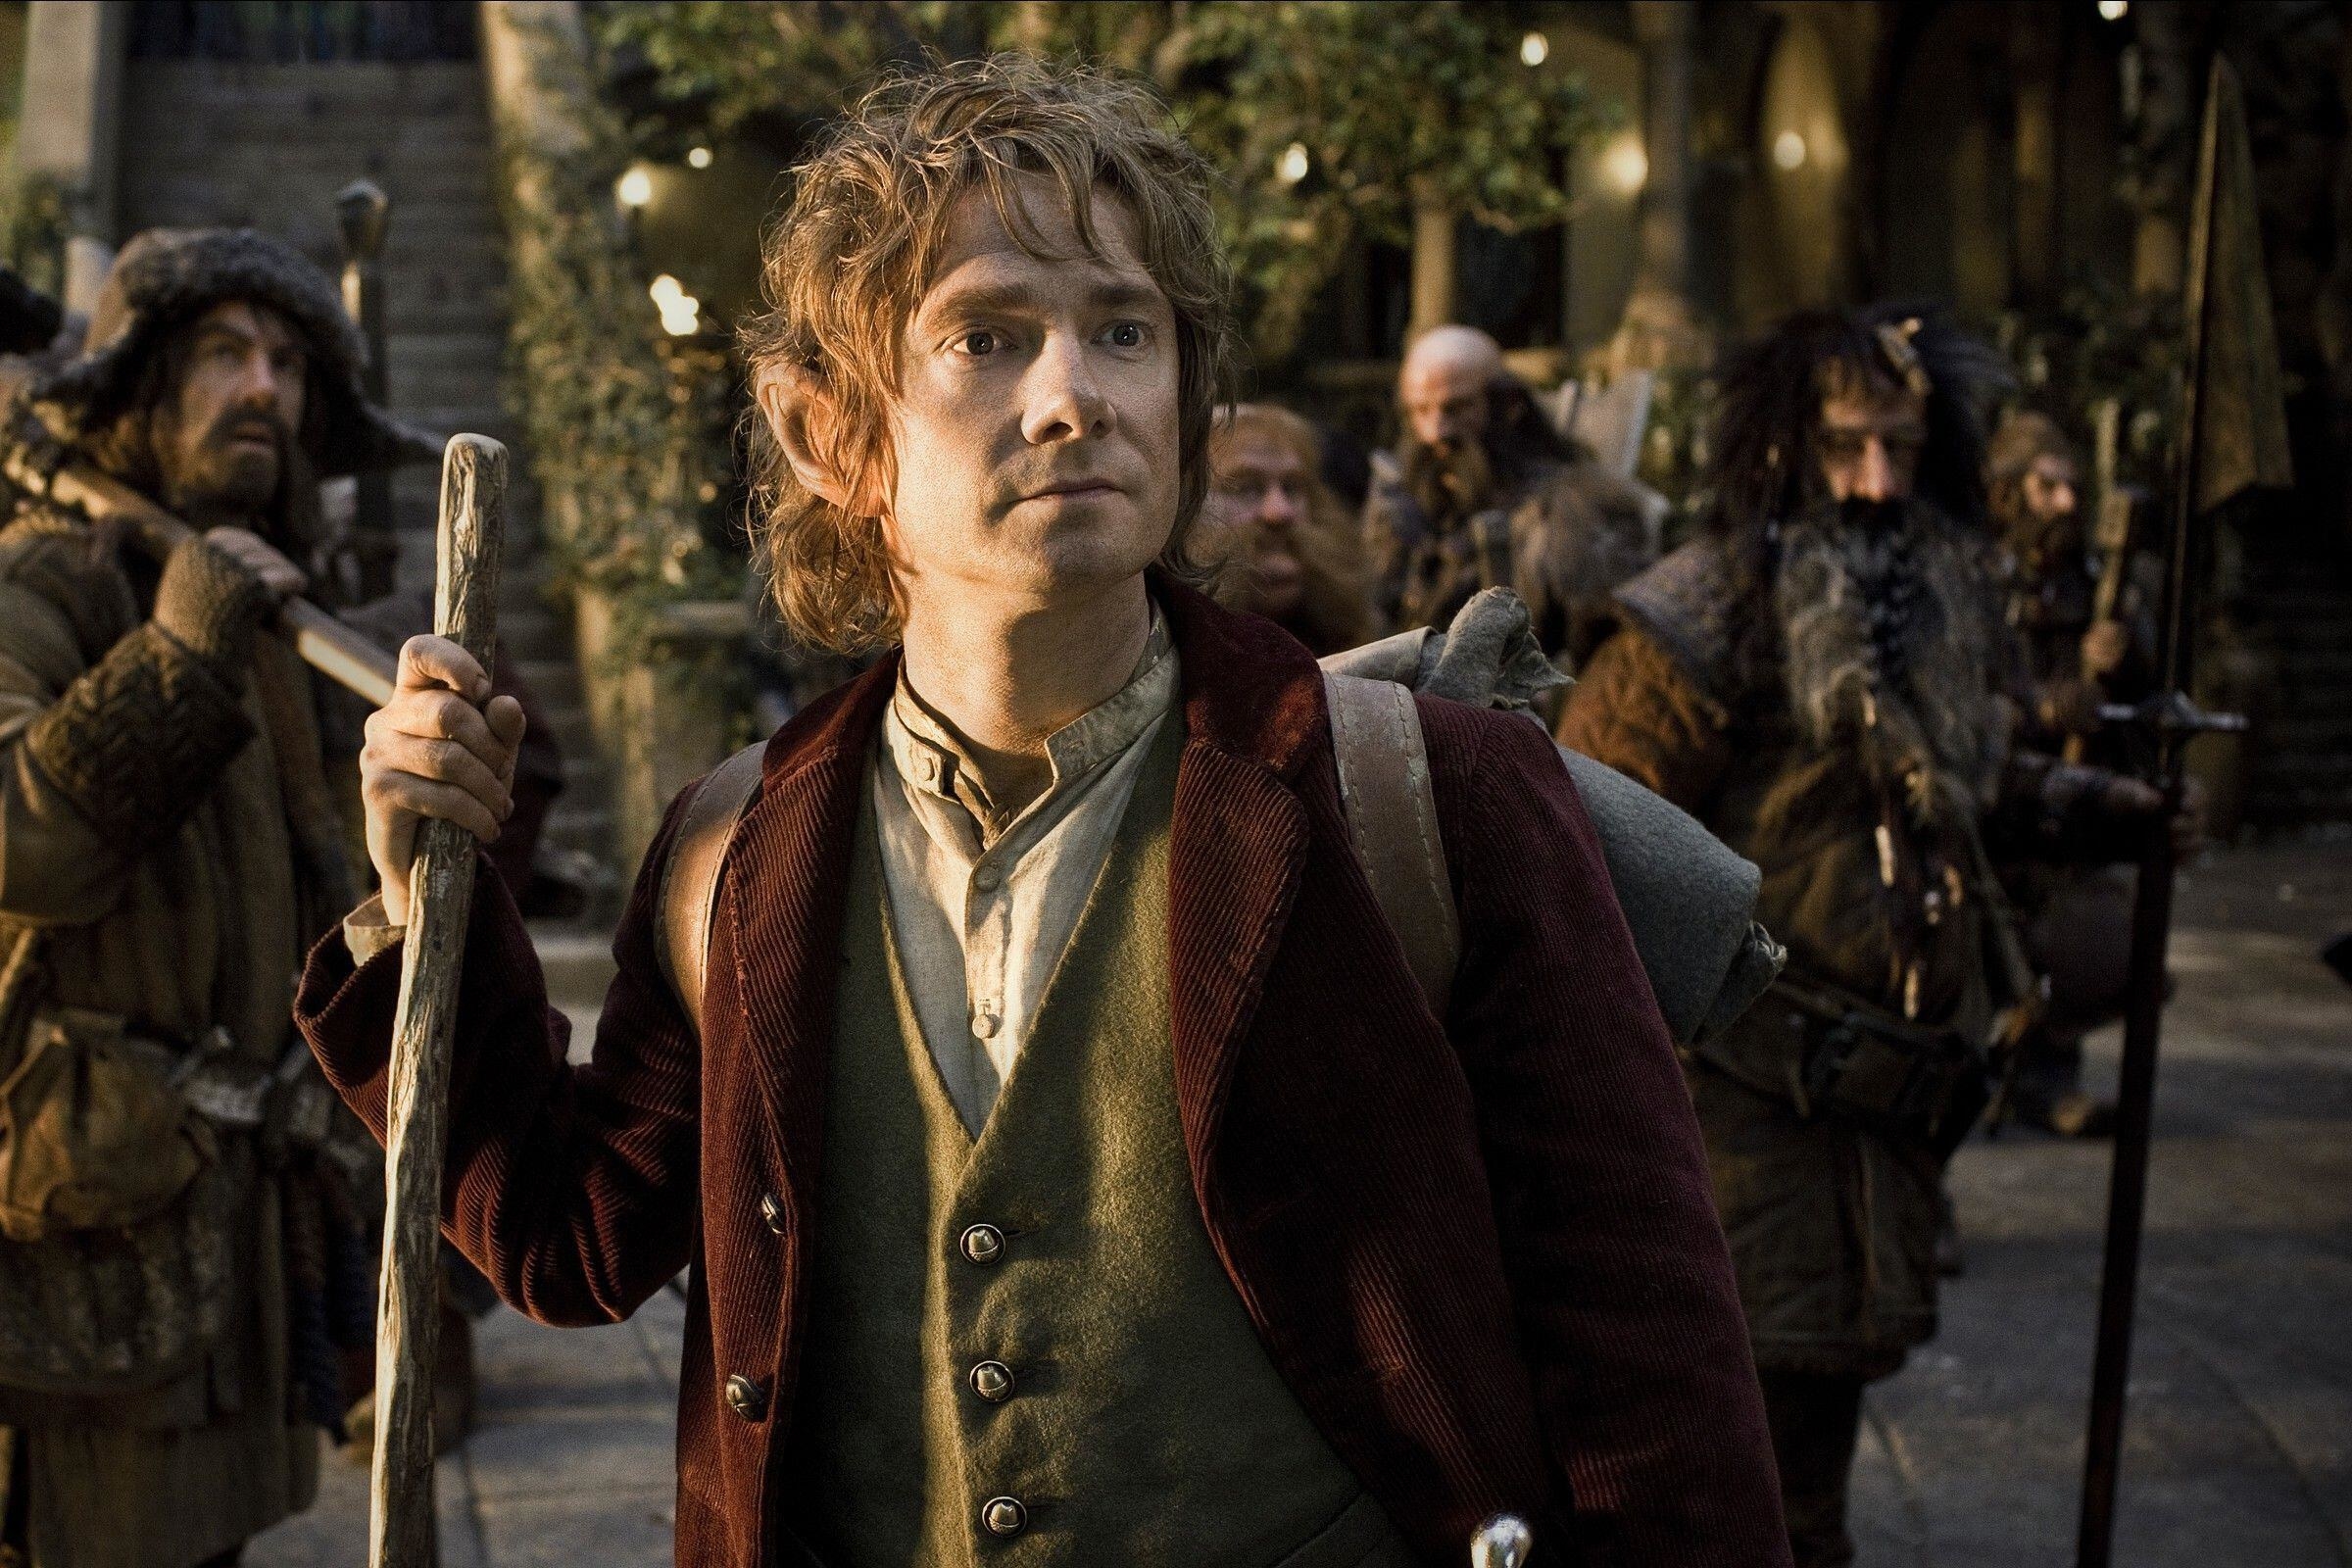 Martin Freeman as Bilbo Baggins holds a walking stick and backpack in the first &quot;Hobbit&quot; film